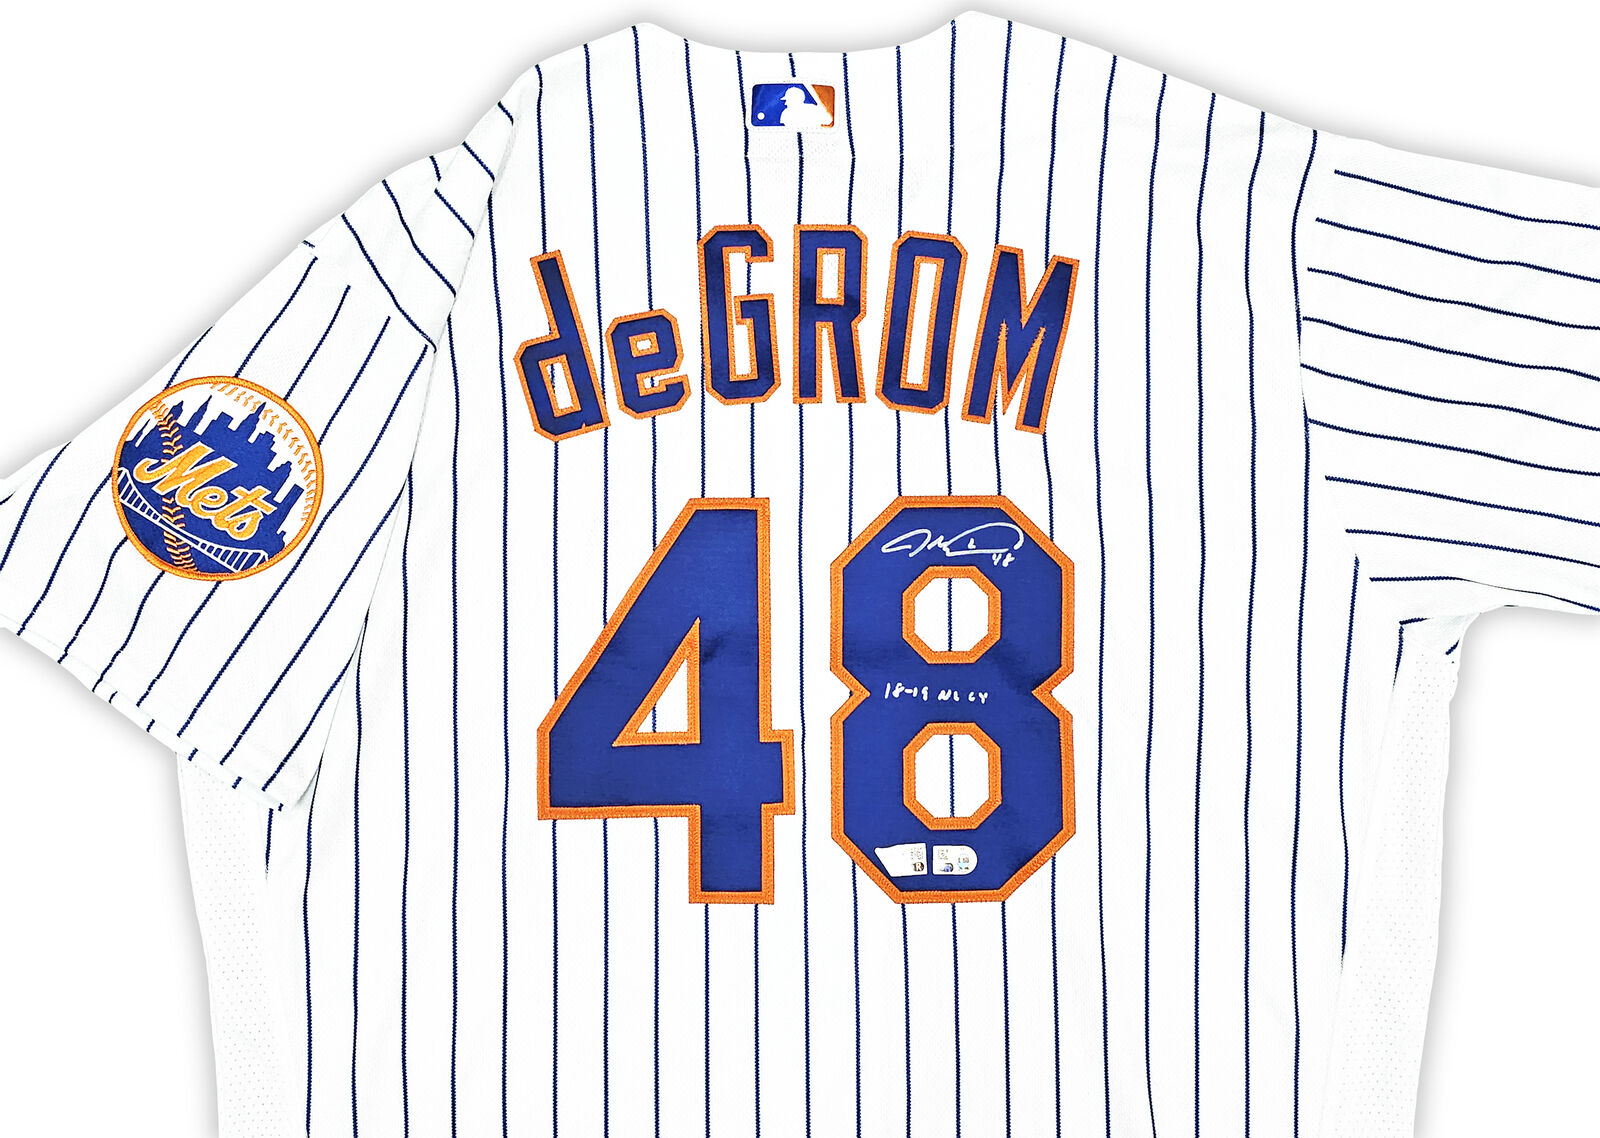 Mets Jacob Degrom Autographed Nike Authentic Jersey Size 44 18-19 Nl Cy  Fanatics Auction